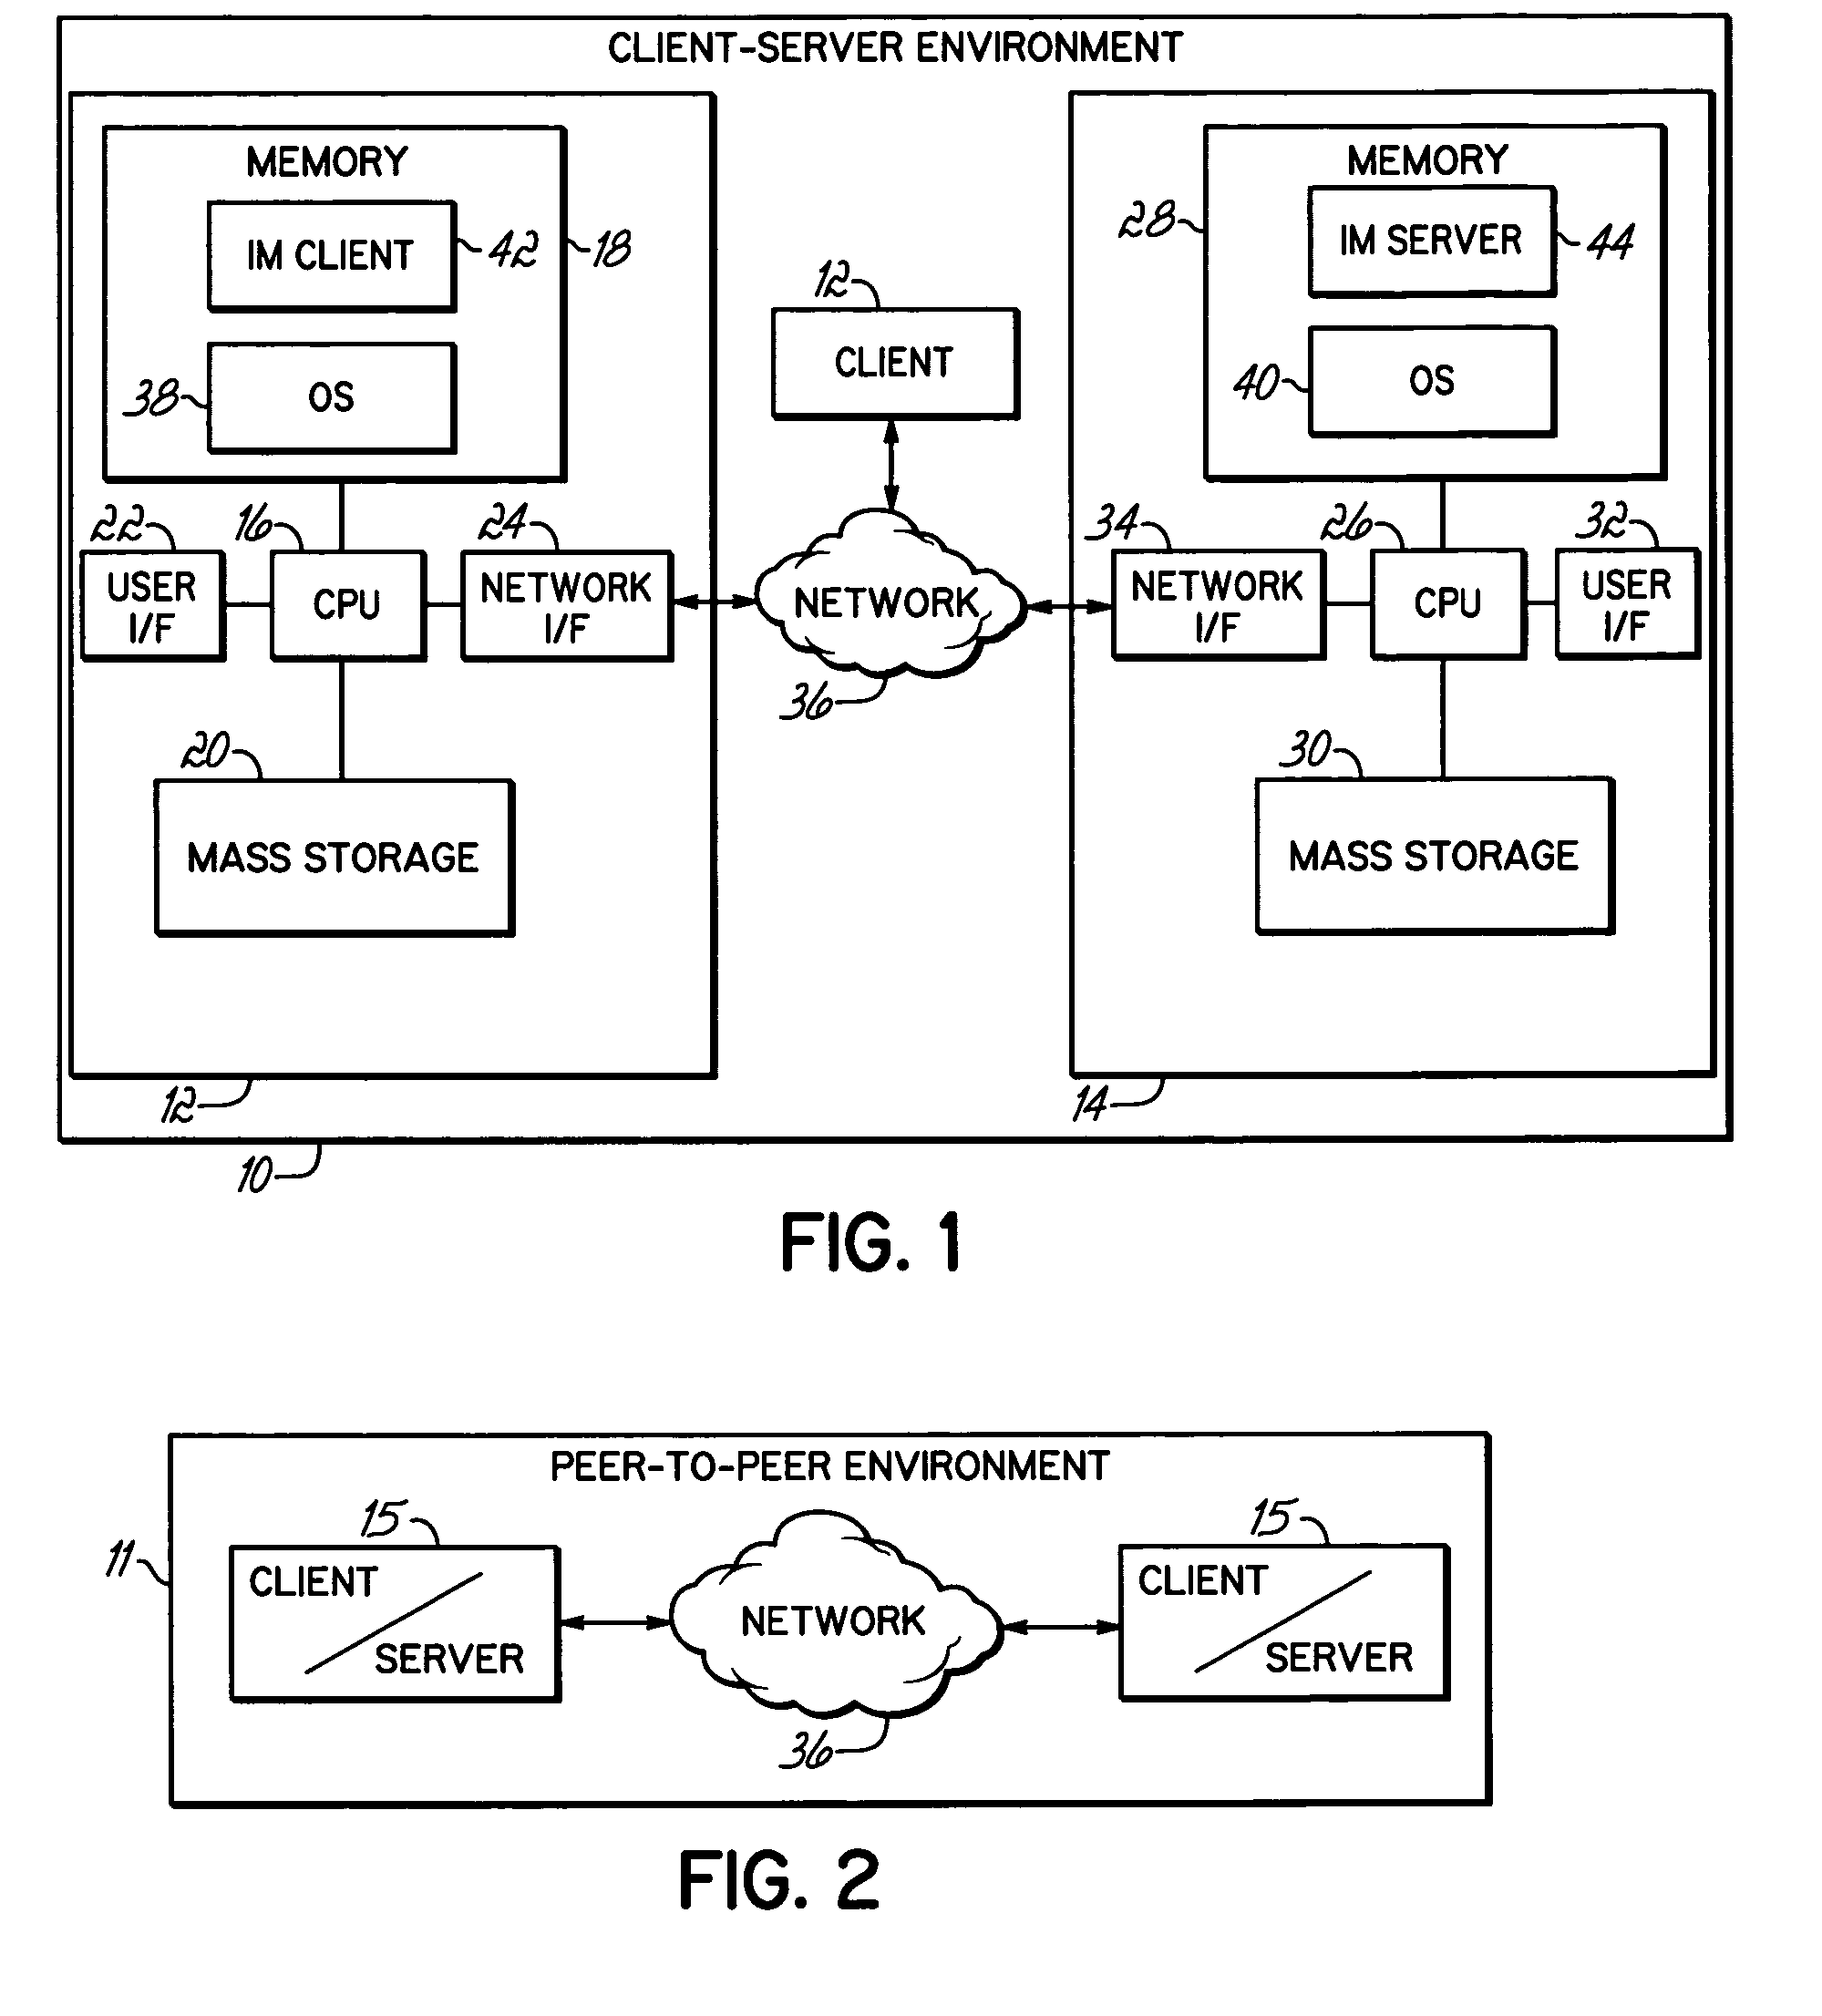 Identifying and displaying relevant shared entities in an instant messaging system